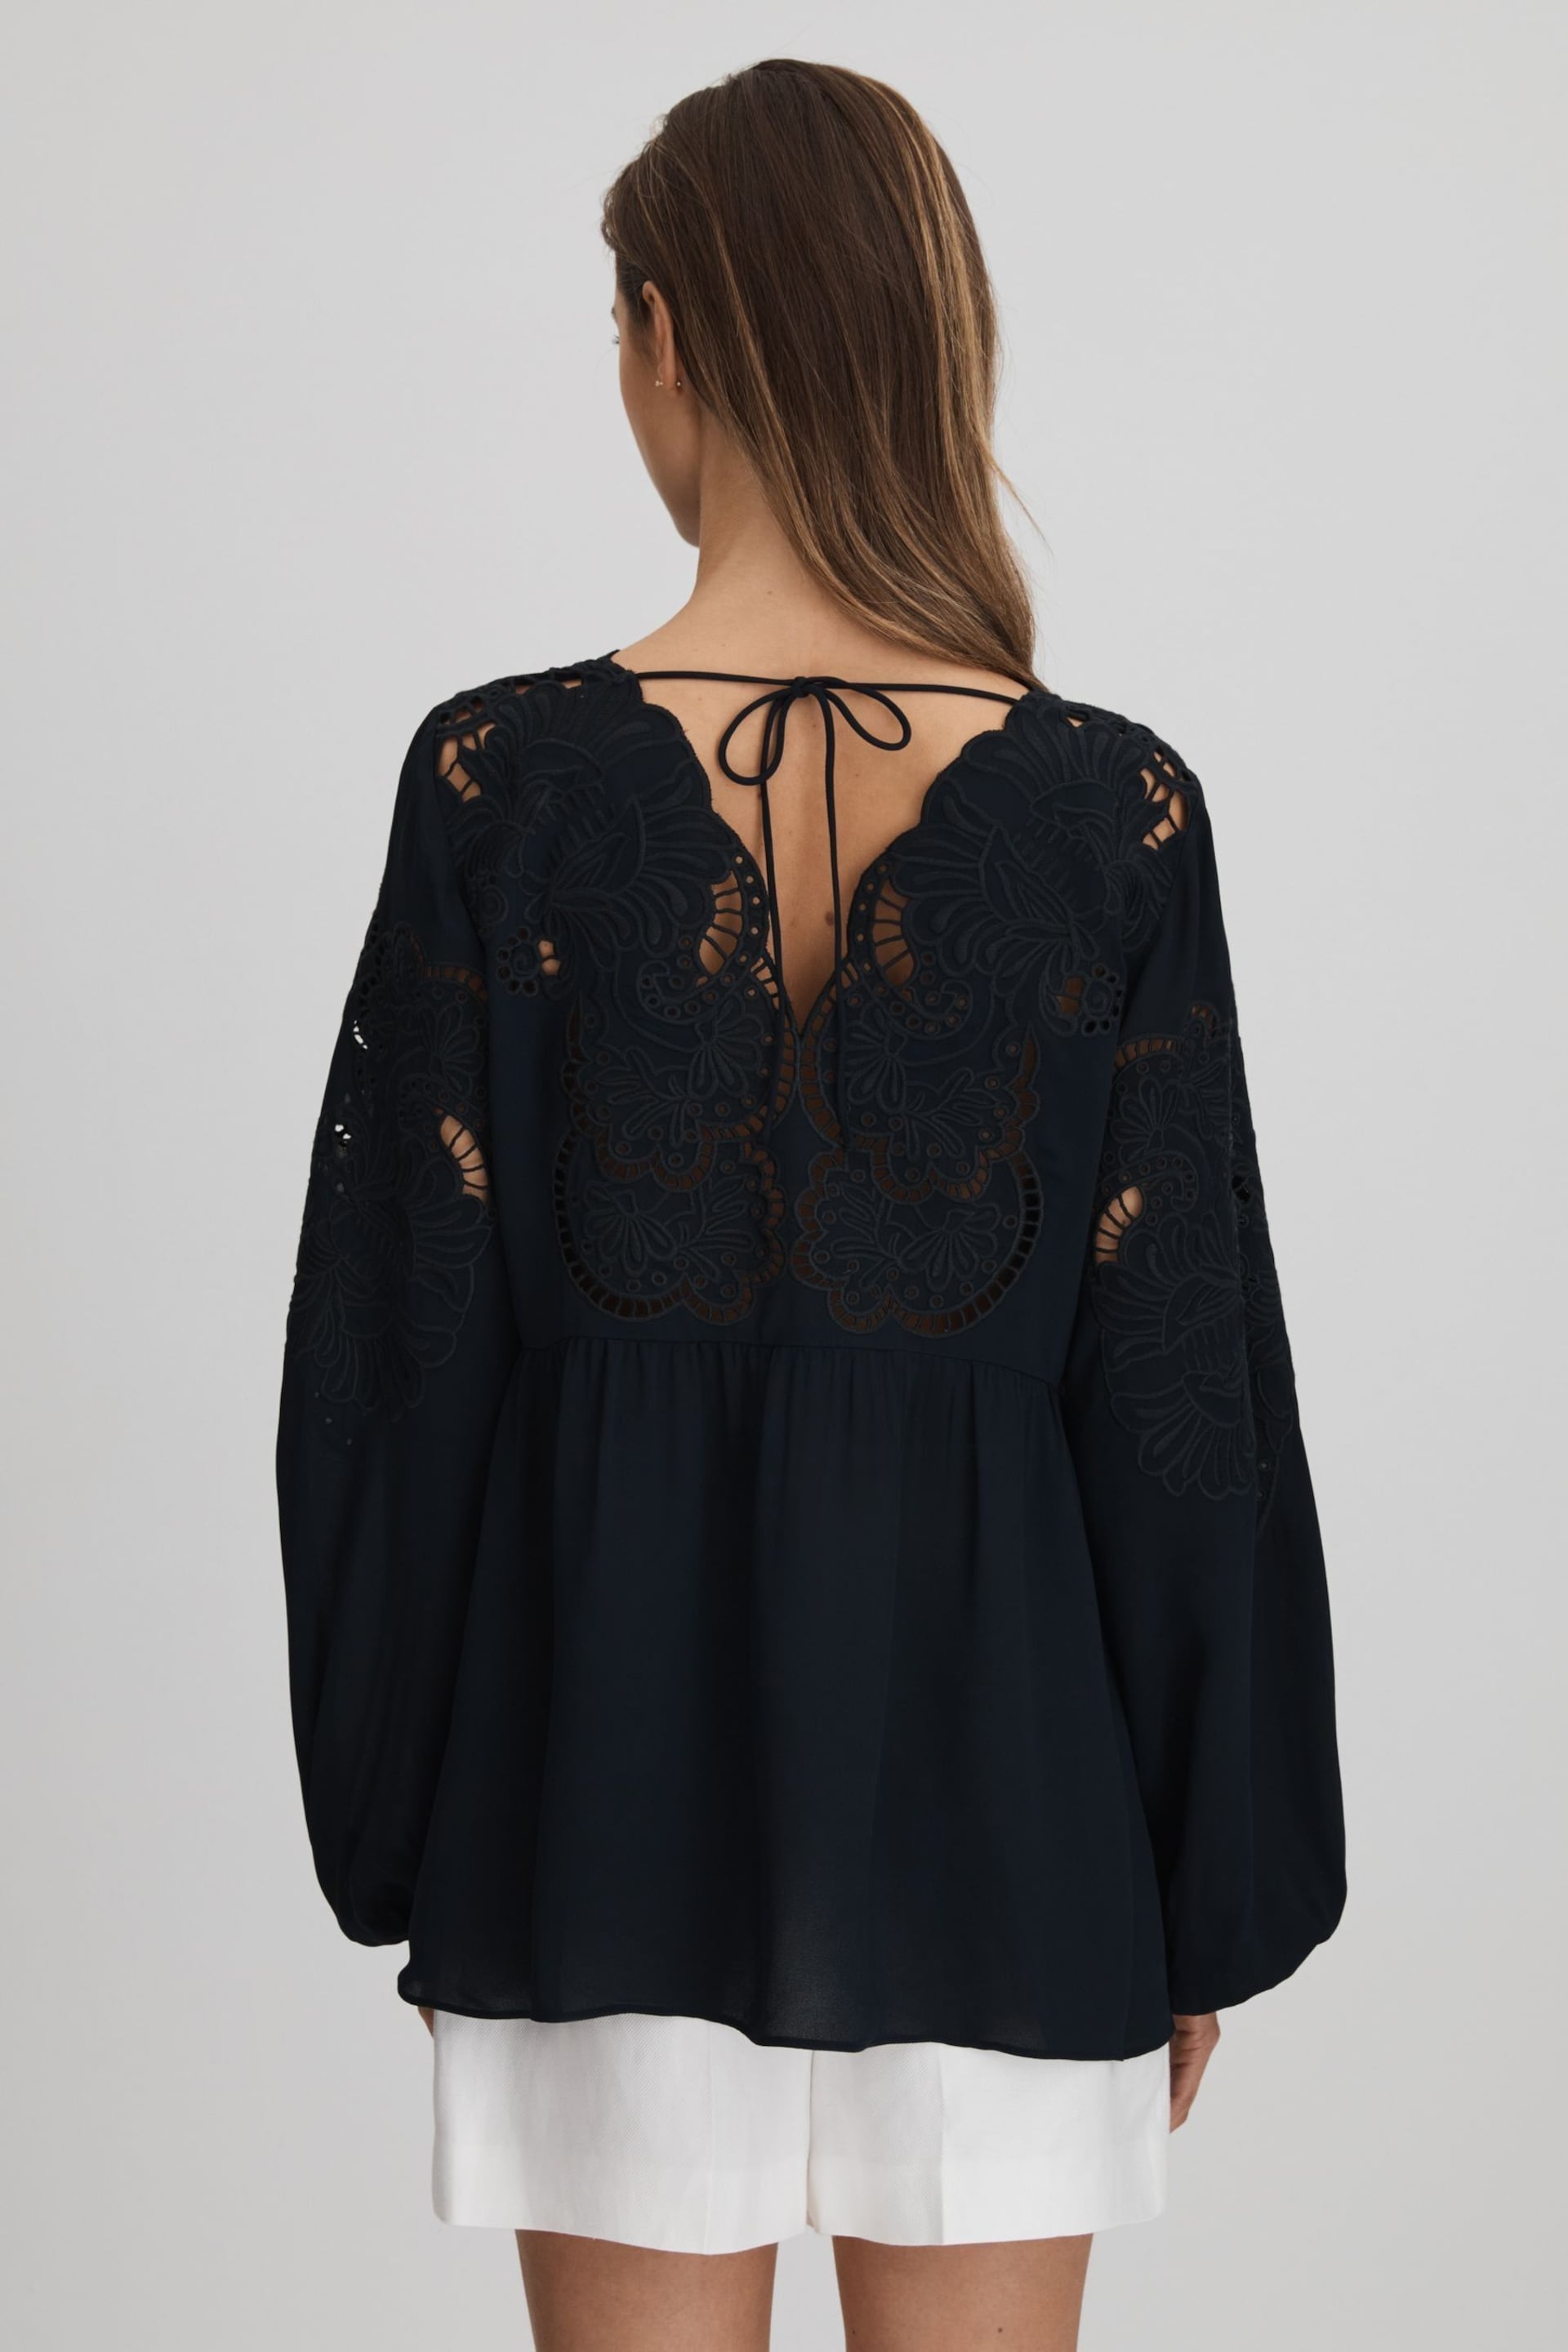 Reiss Navy Noa Lace Cut-Out Blouse - Image 5 of 7